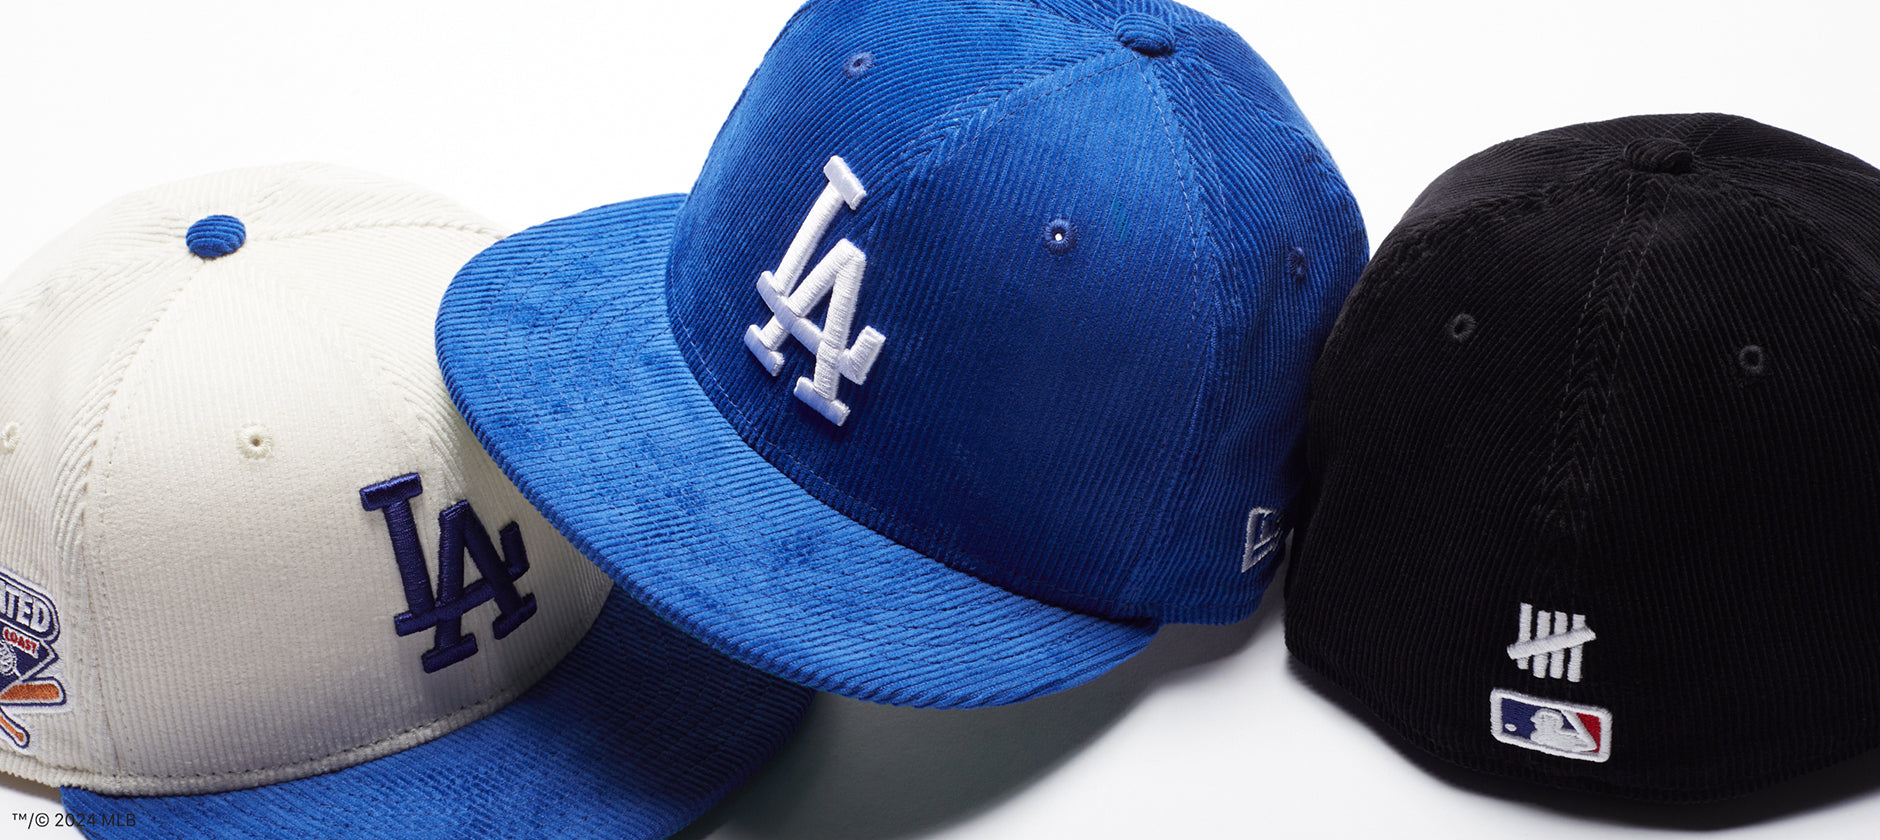 UNDEFEATED X LOS ANGELES DODGERS X NEW ERA SHOP NOW